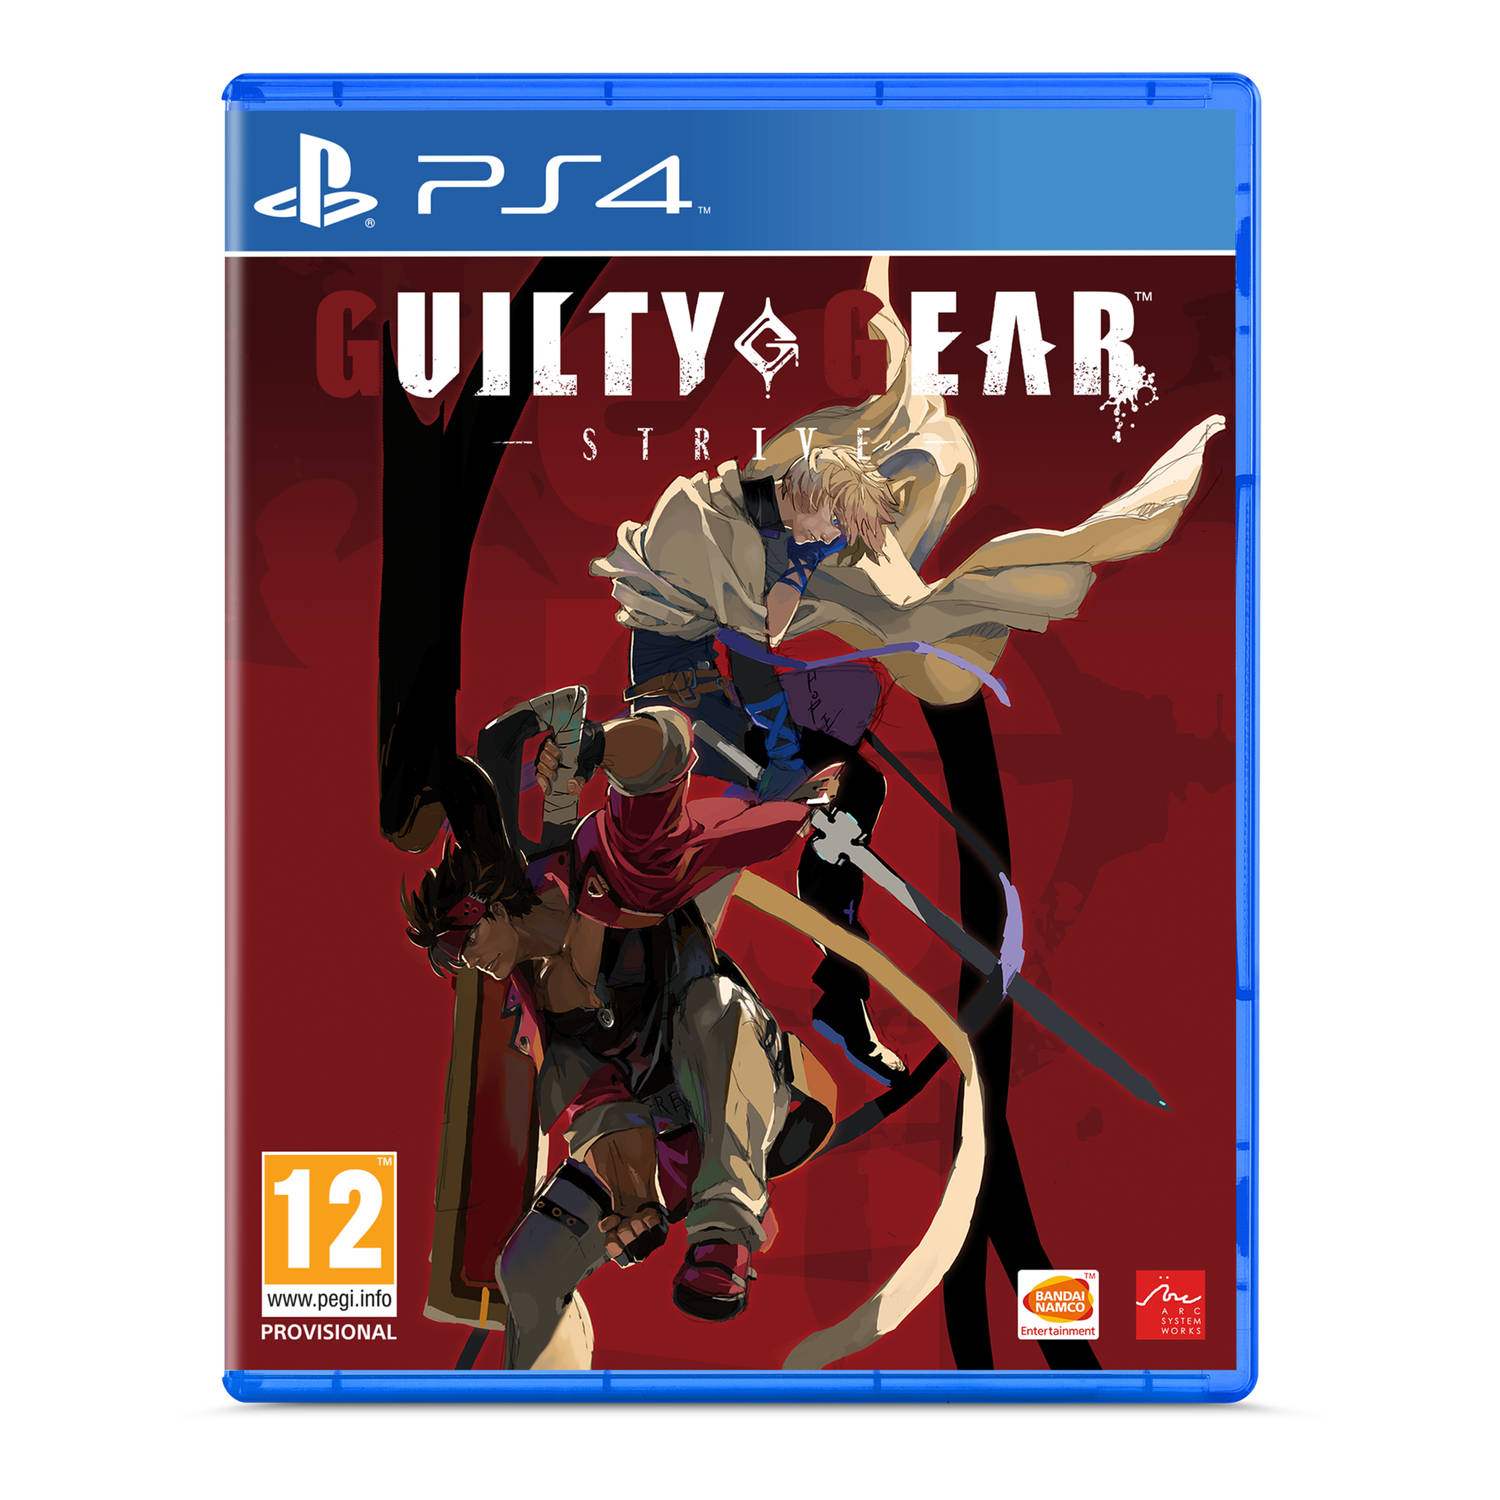 Guilty gear Strive, (Playstation 4). PS4